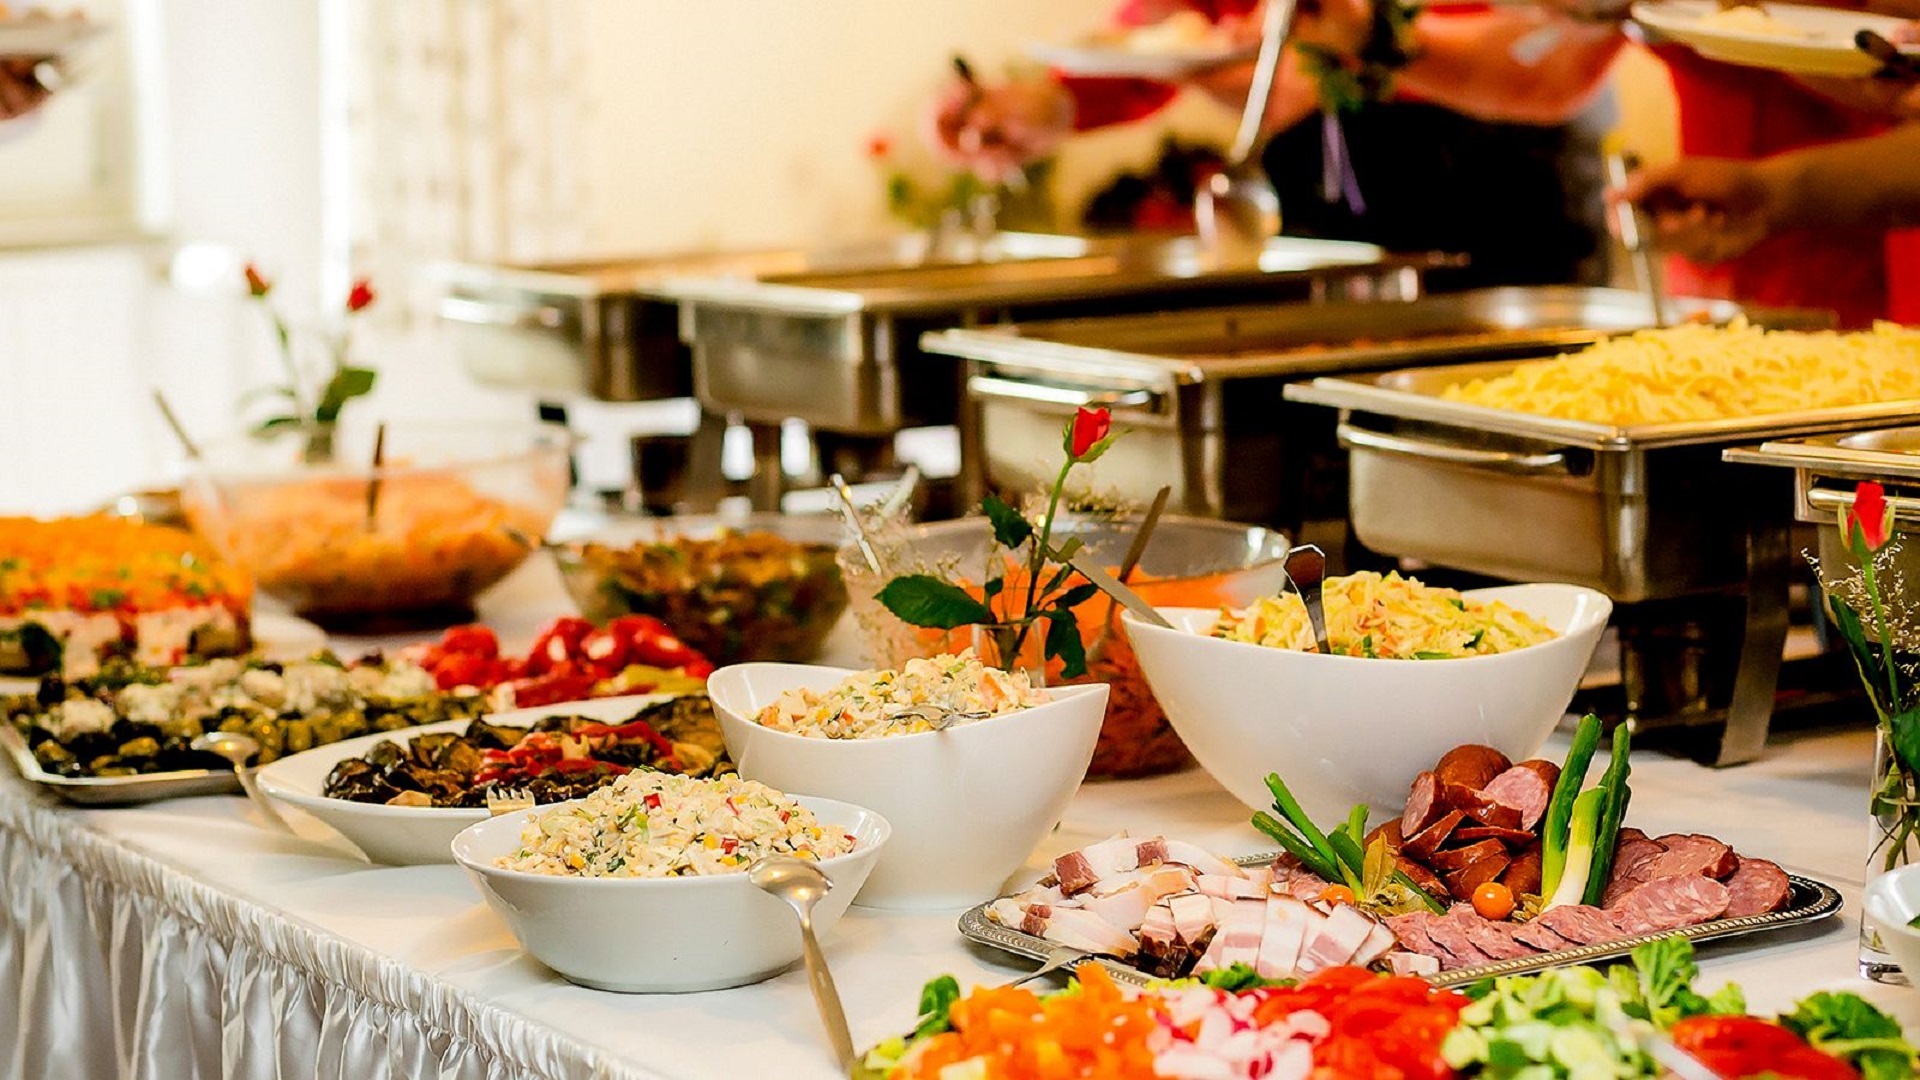 Catering Business Ideas in tamil